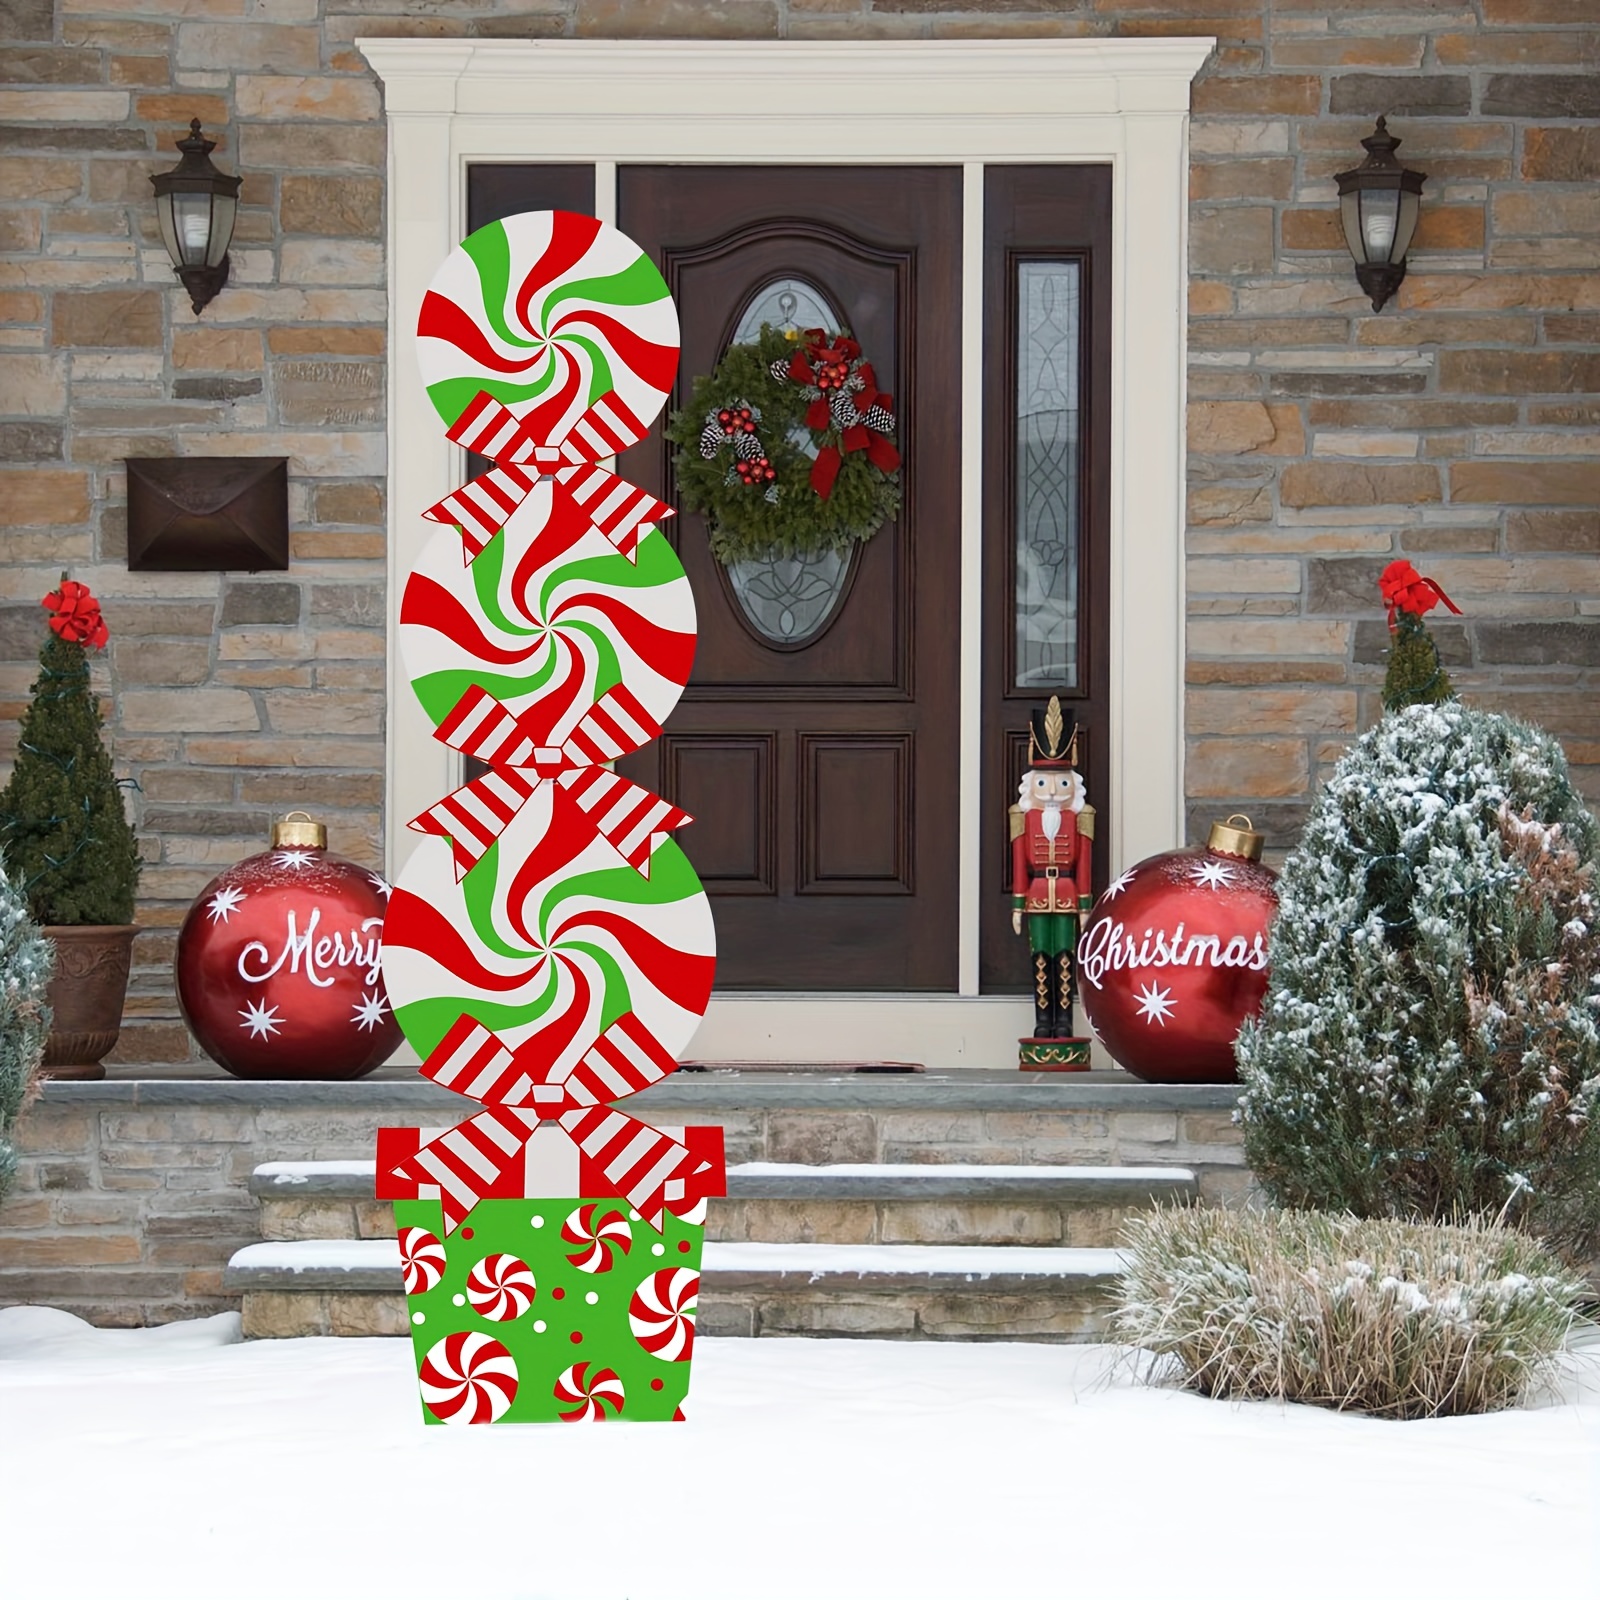 Christmas Decorations for the Home & Yard